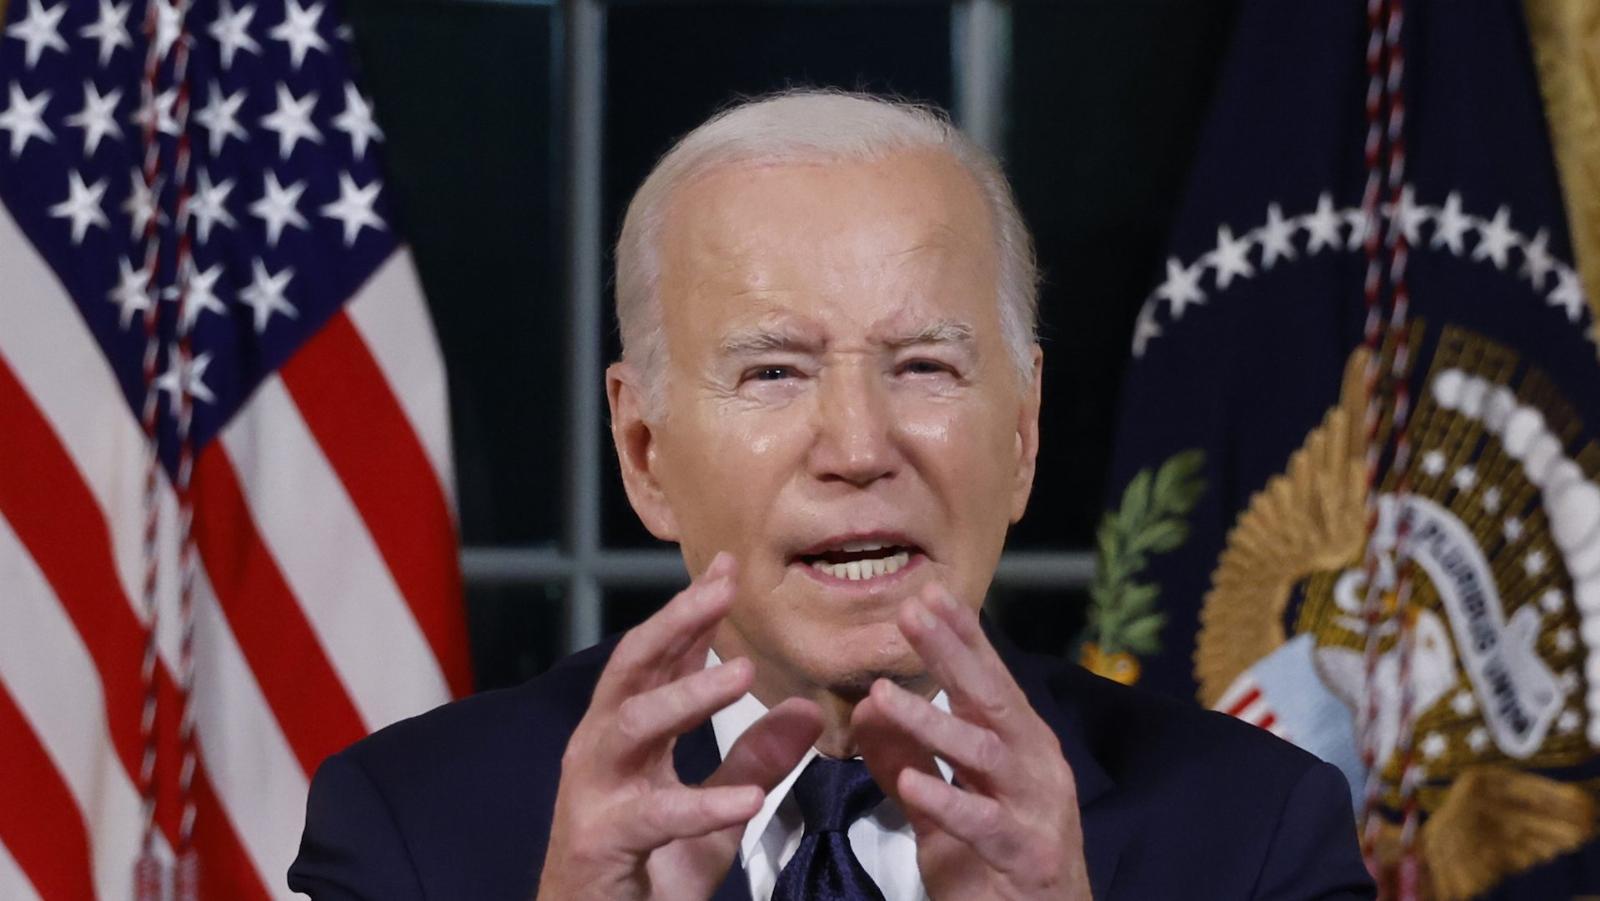 President Biden issues executive order to set standards for AI safety and security